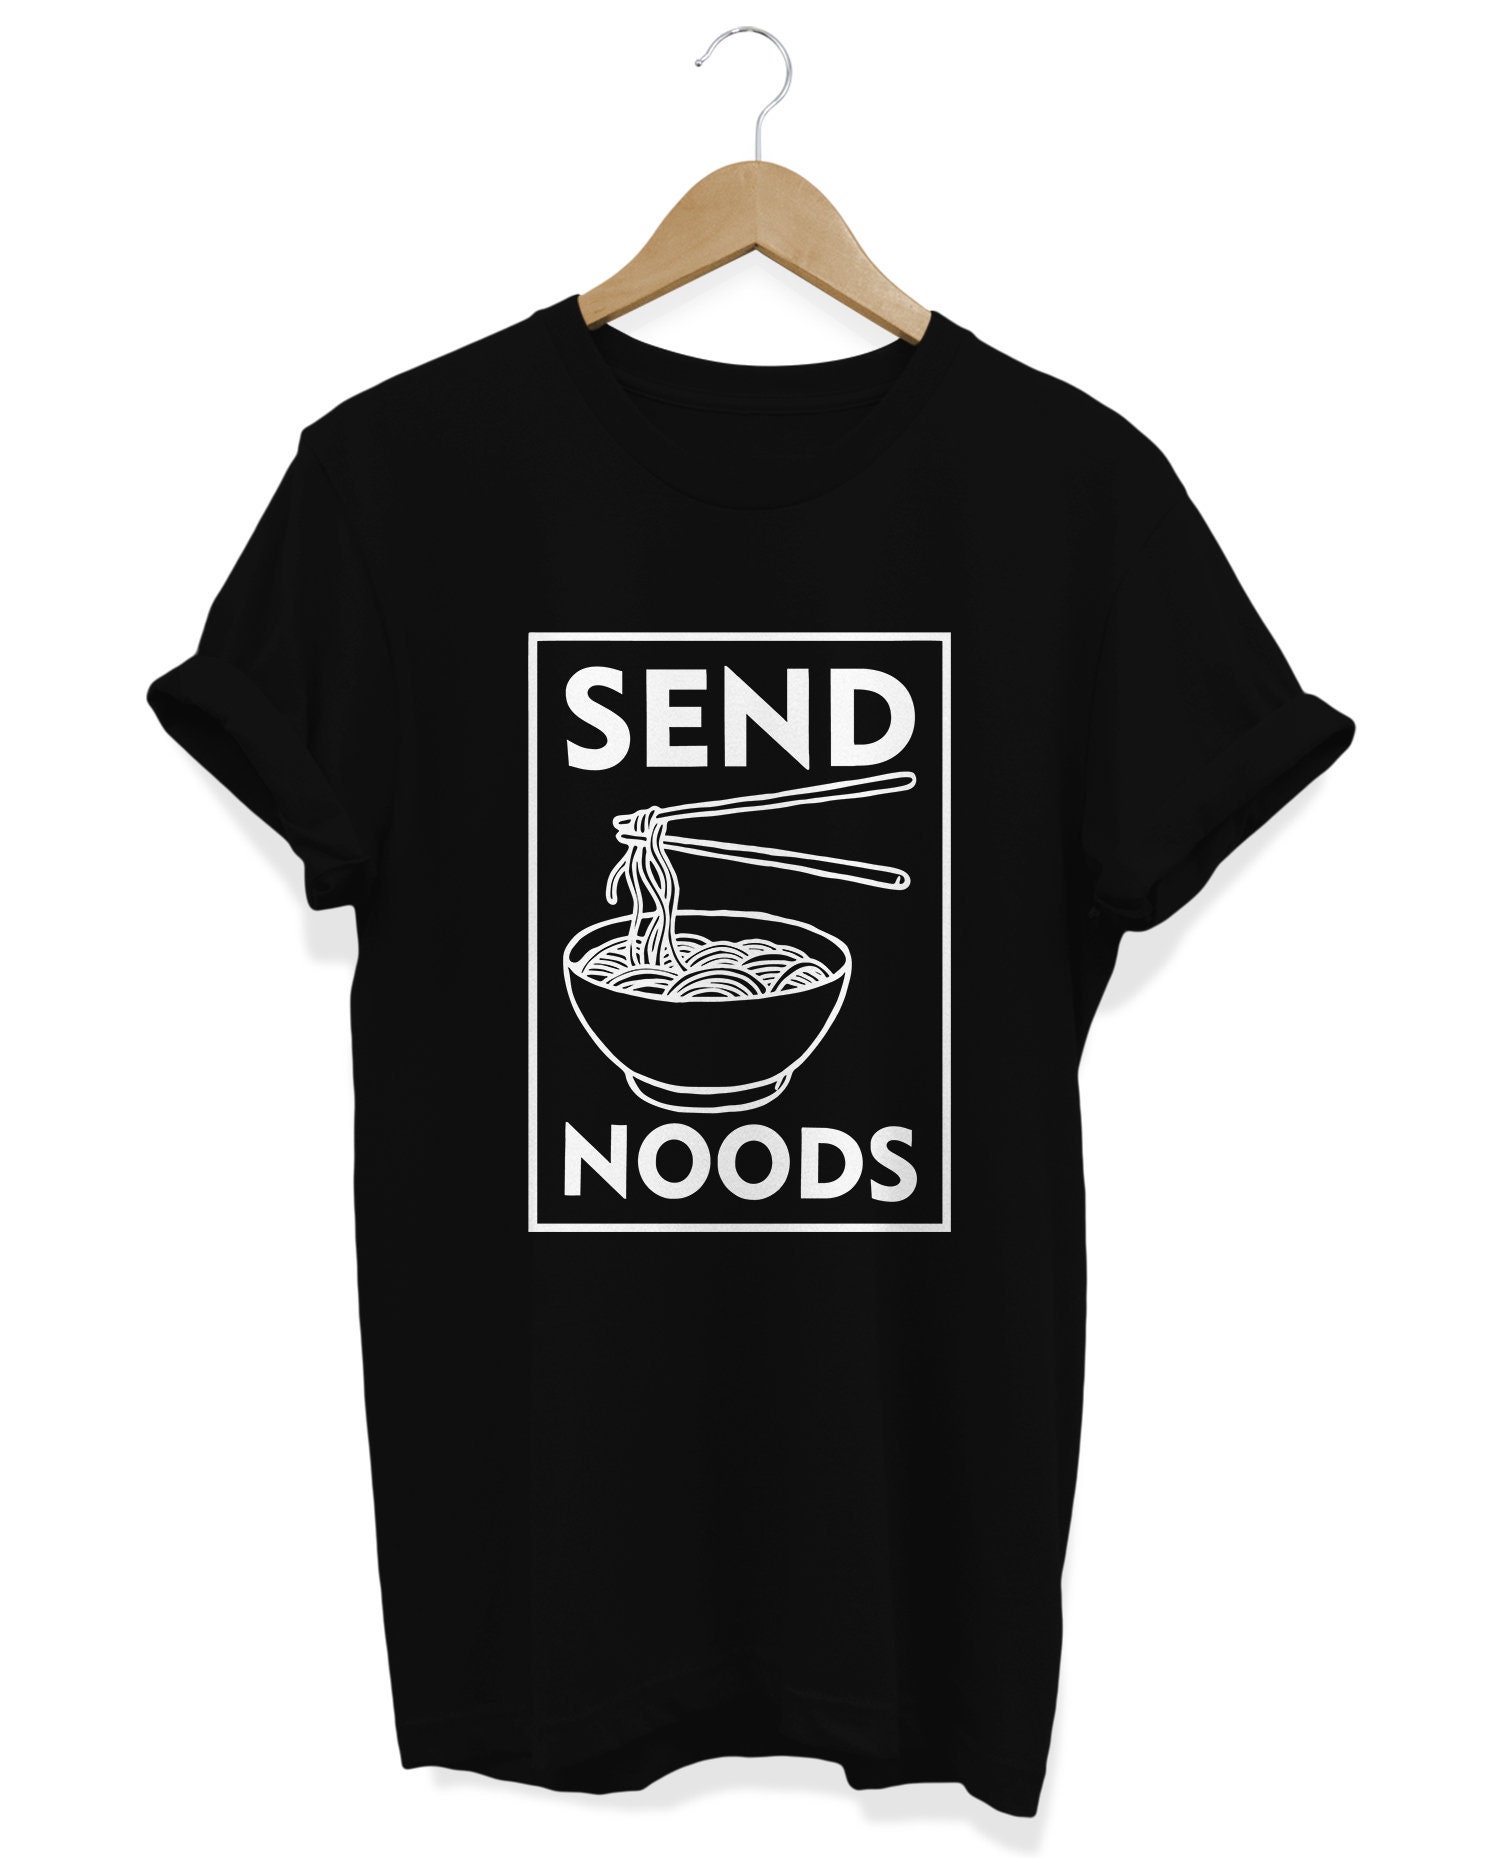 Send Noods T Shirt, Funny Foodie Ramen Lover T-Shirt, Chinese Food Tee, Pun Clothing Gifts